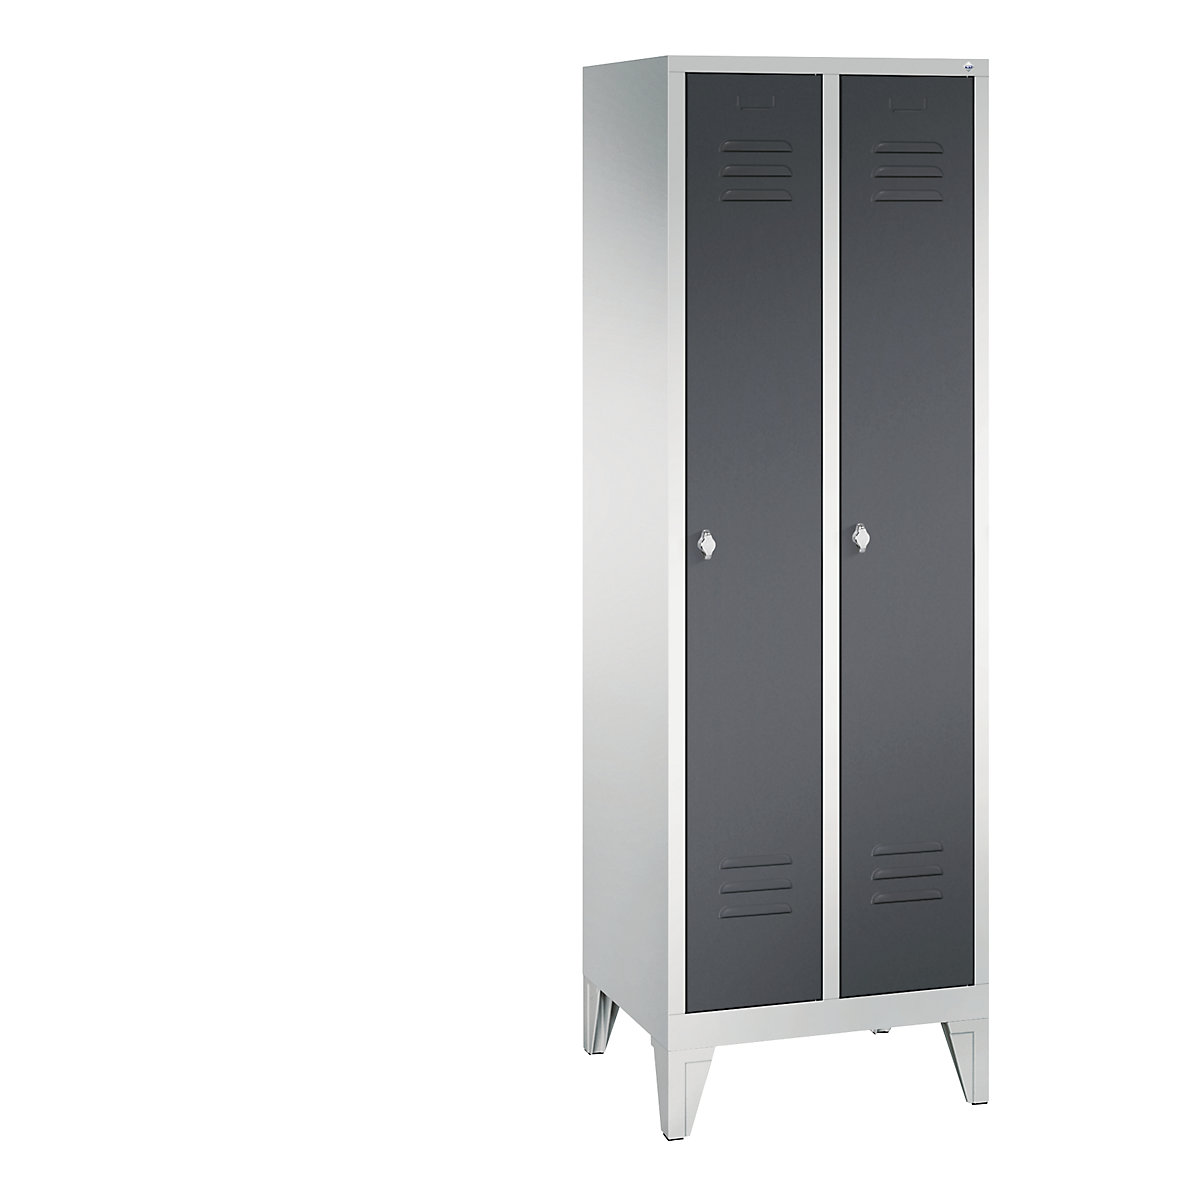 CLASSIC cloakroom locker with feet – C+P, 2 compartments, compartment width 300 mm, light grey / black grey-5